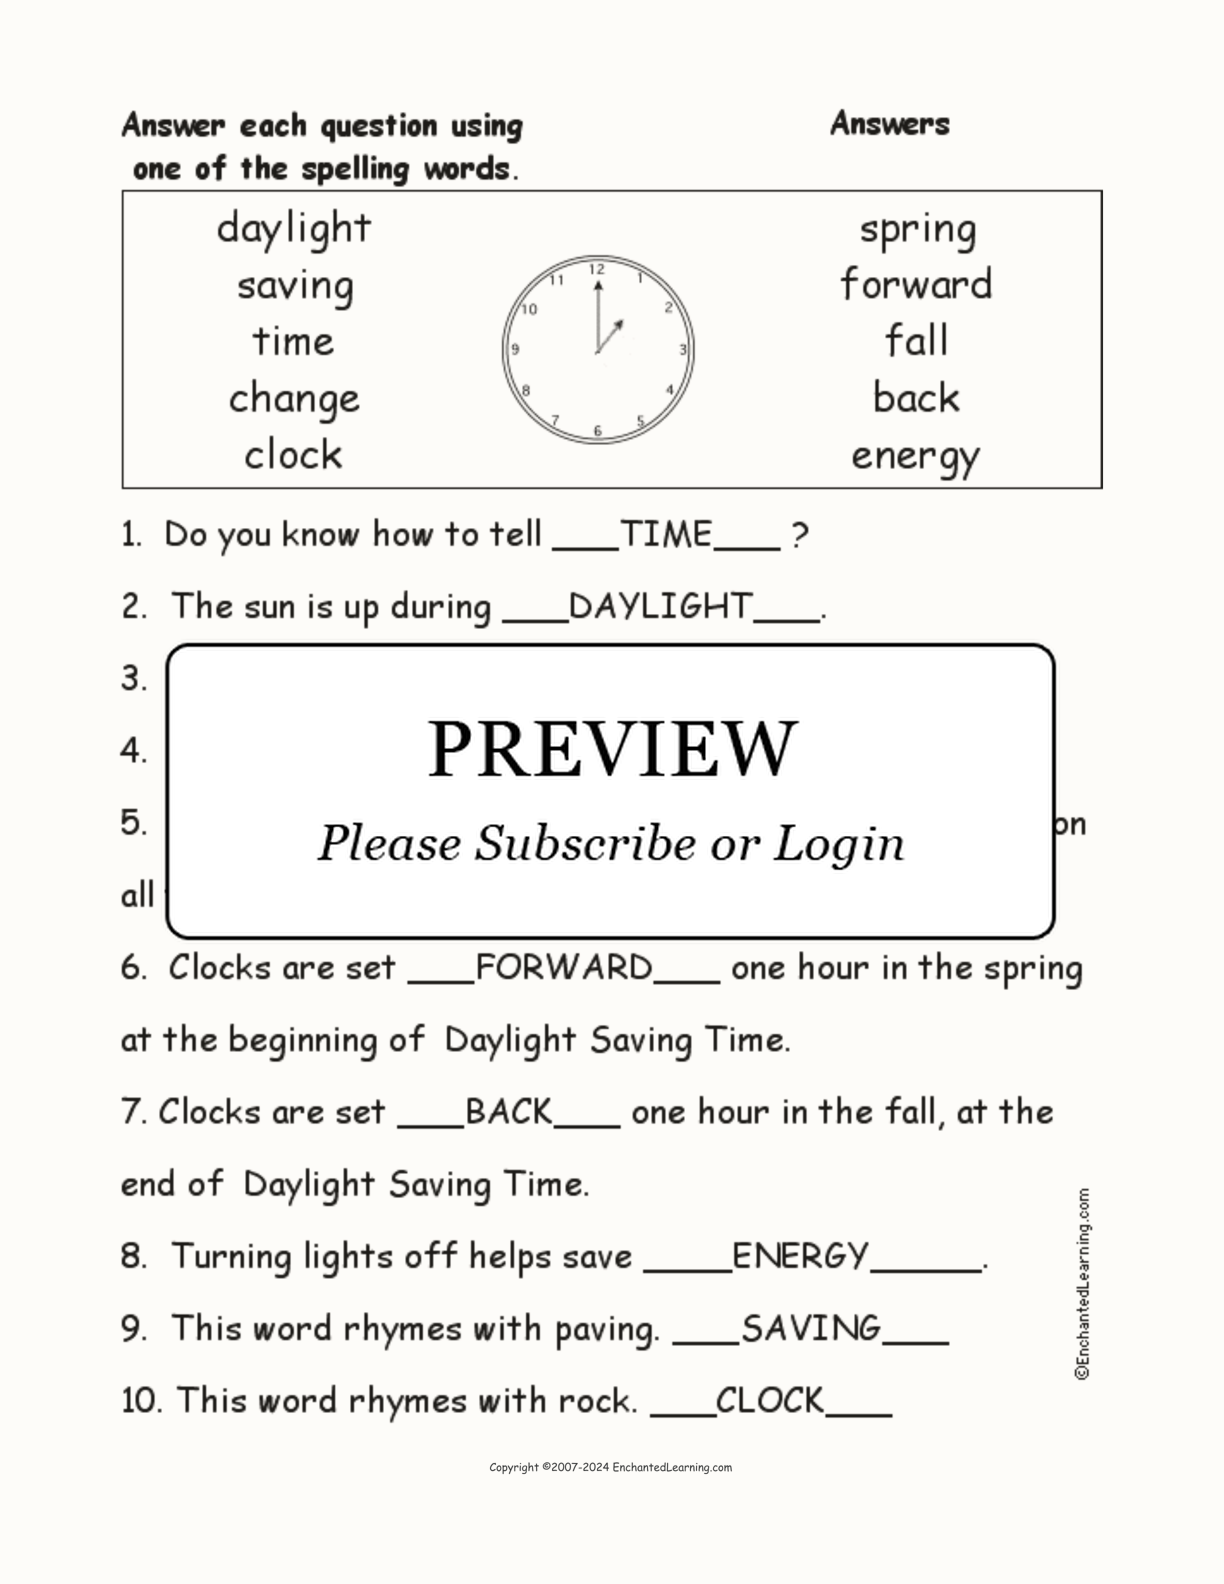 Daylight Saving Time: Spelling Word Questions interactive worksheet page 2